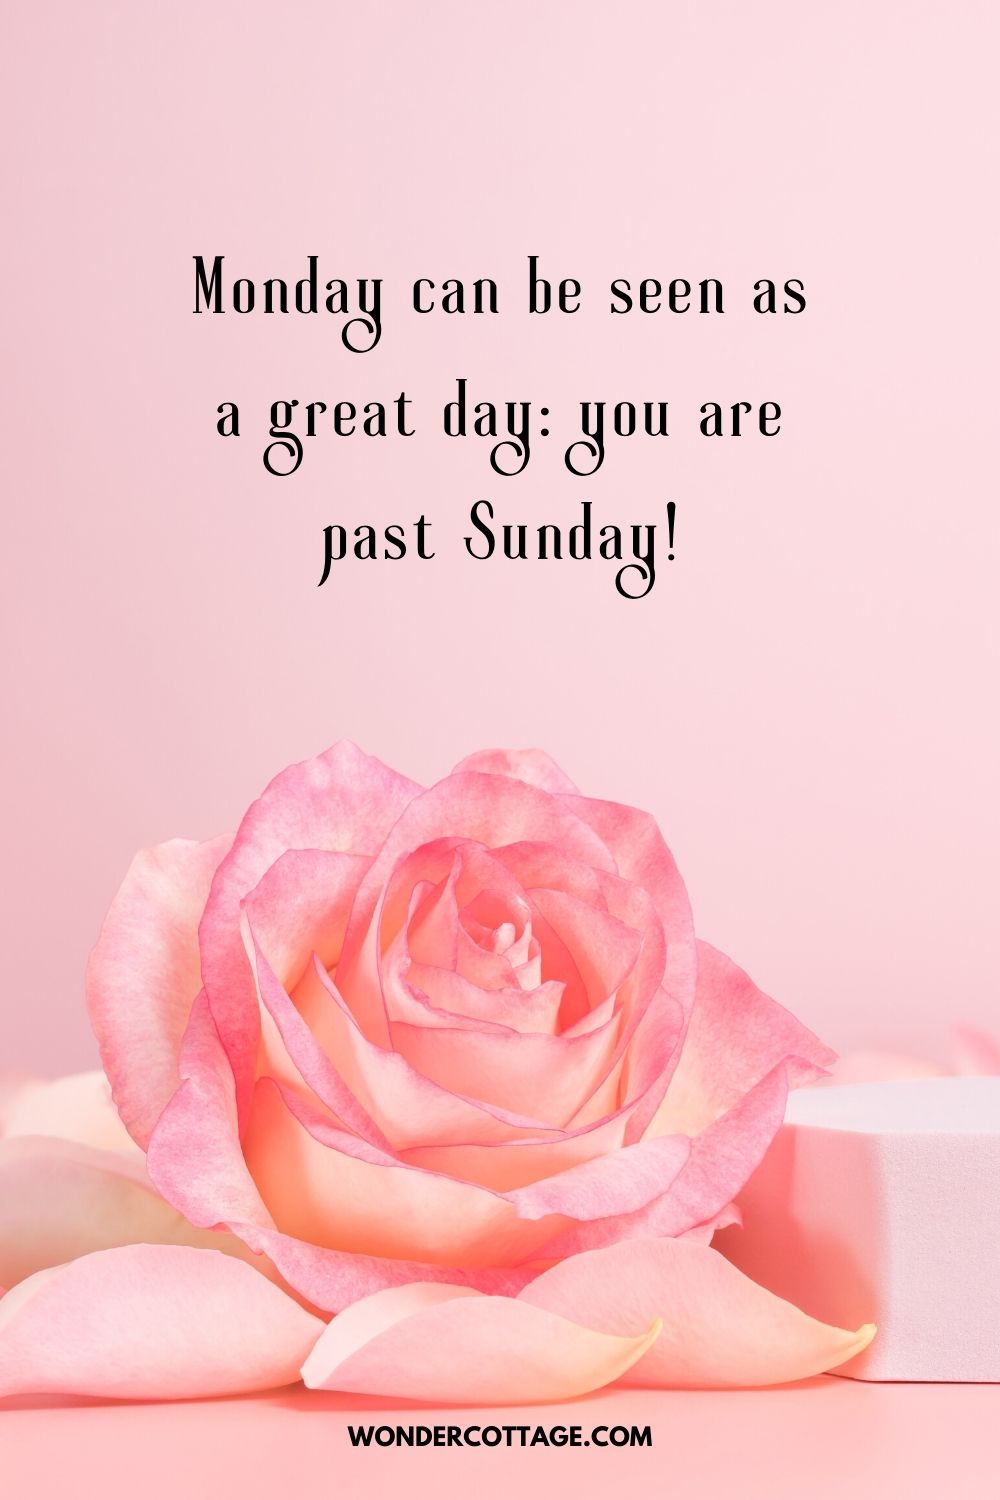 Monday can be seen as a great day: you are past Sunday!